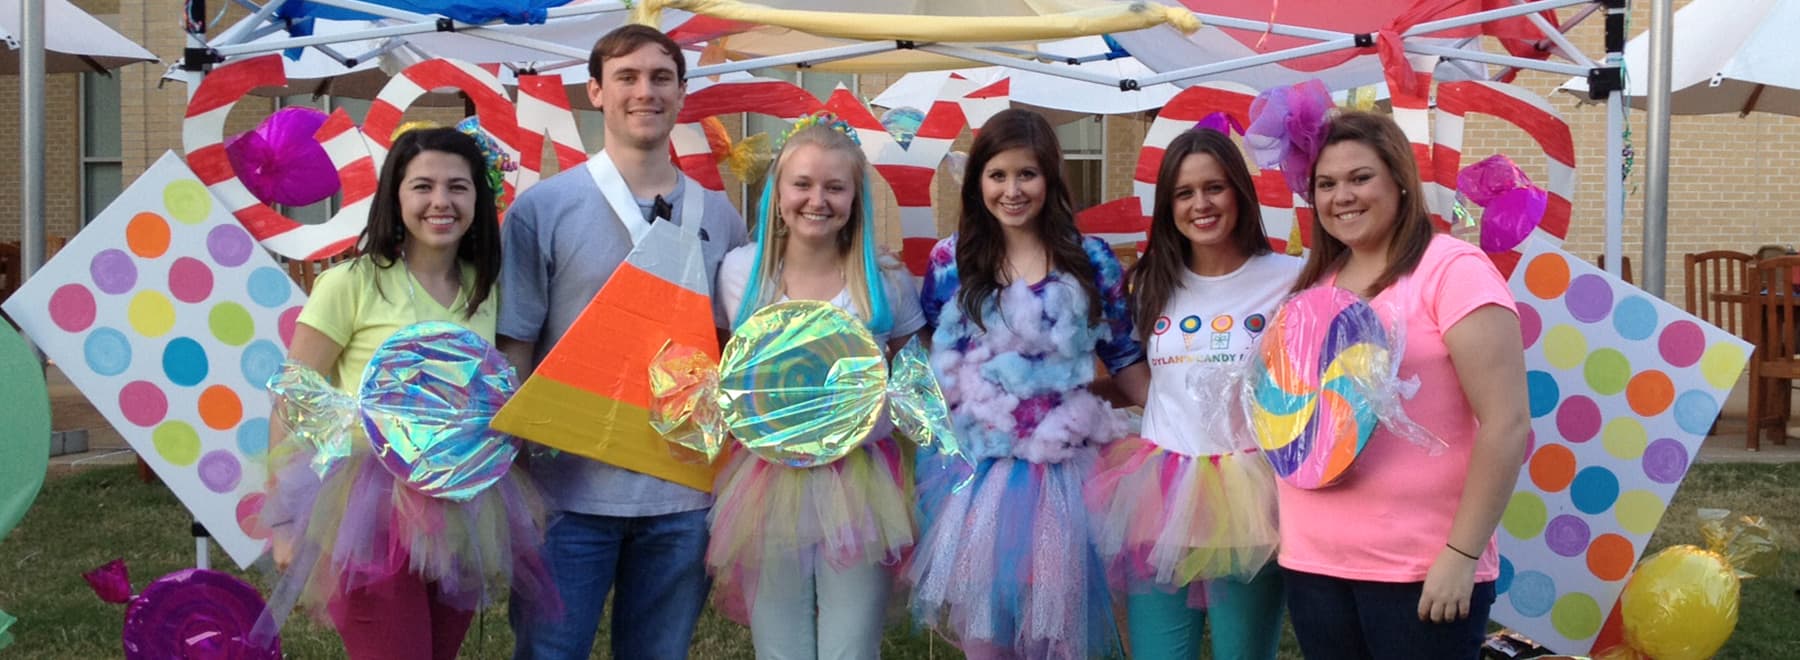 Group of male and female students pose for candy land event in colorful costumes.